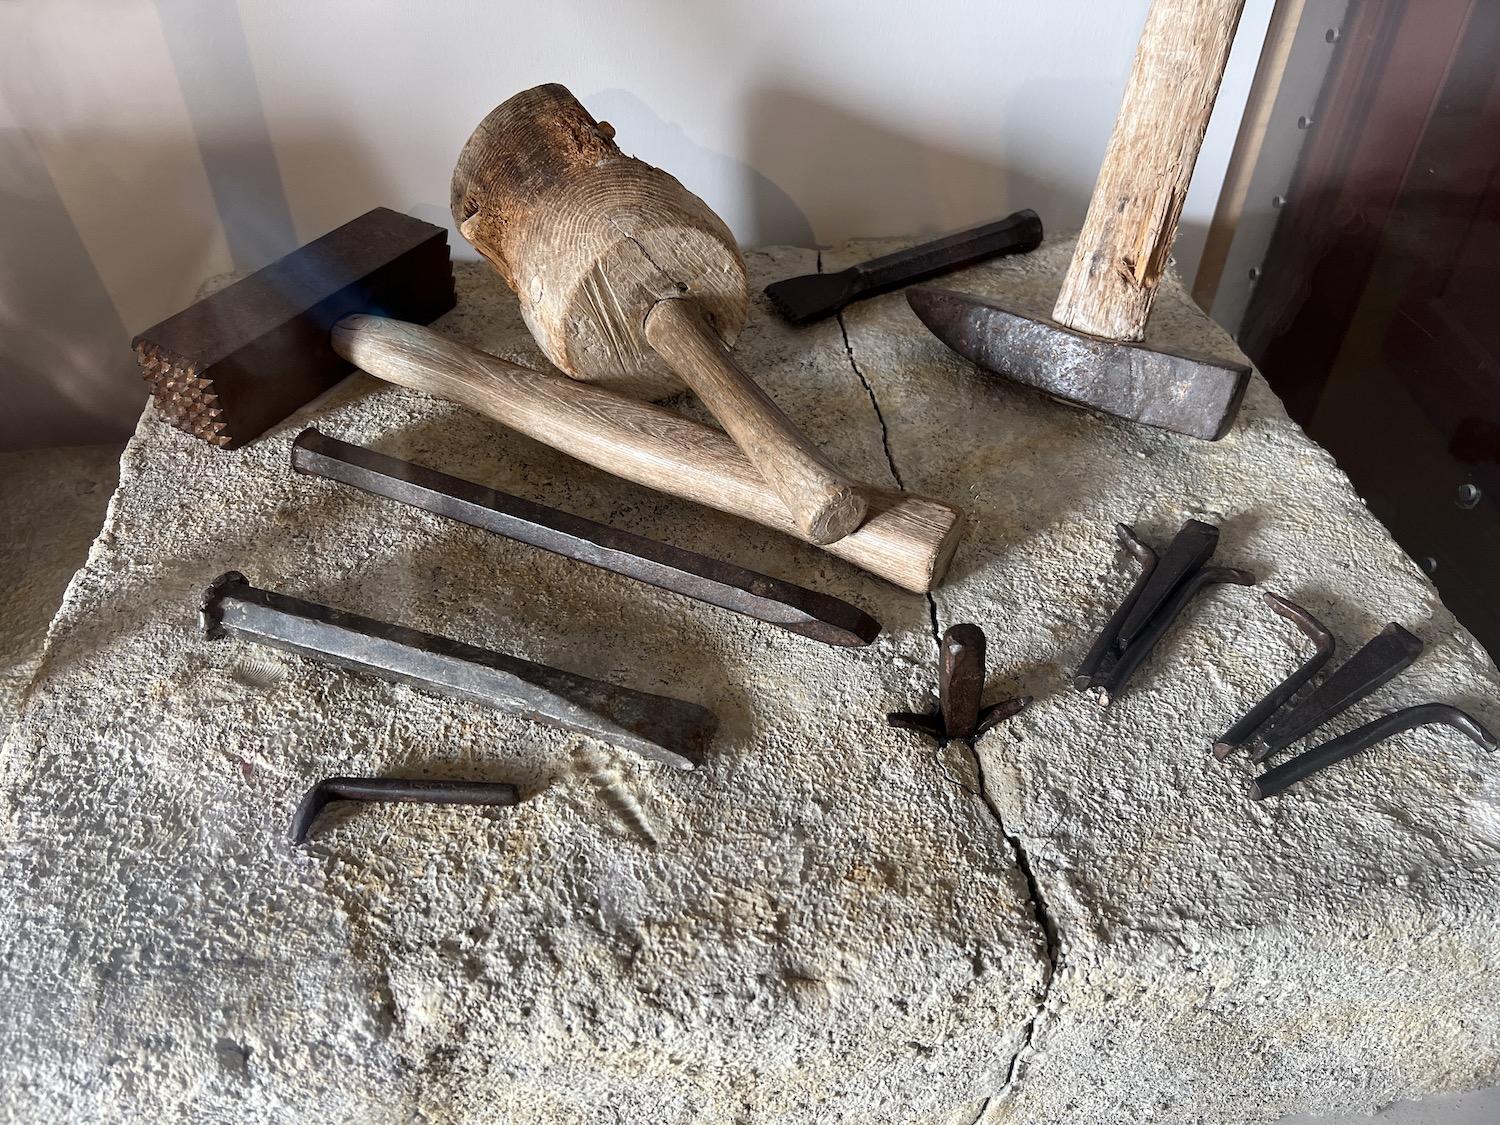 Quarrying and finishing tools are on display at St. Andrew's Rectory.